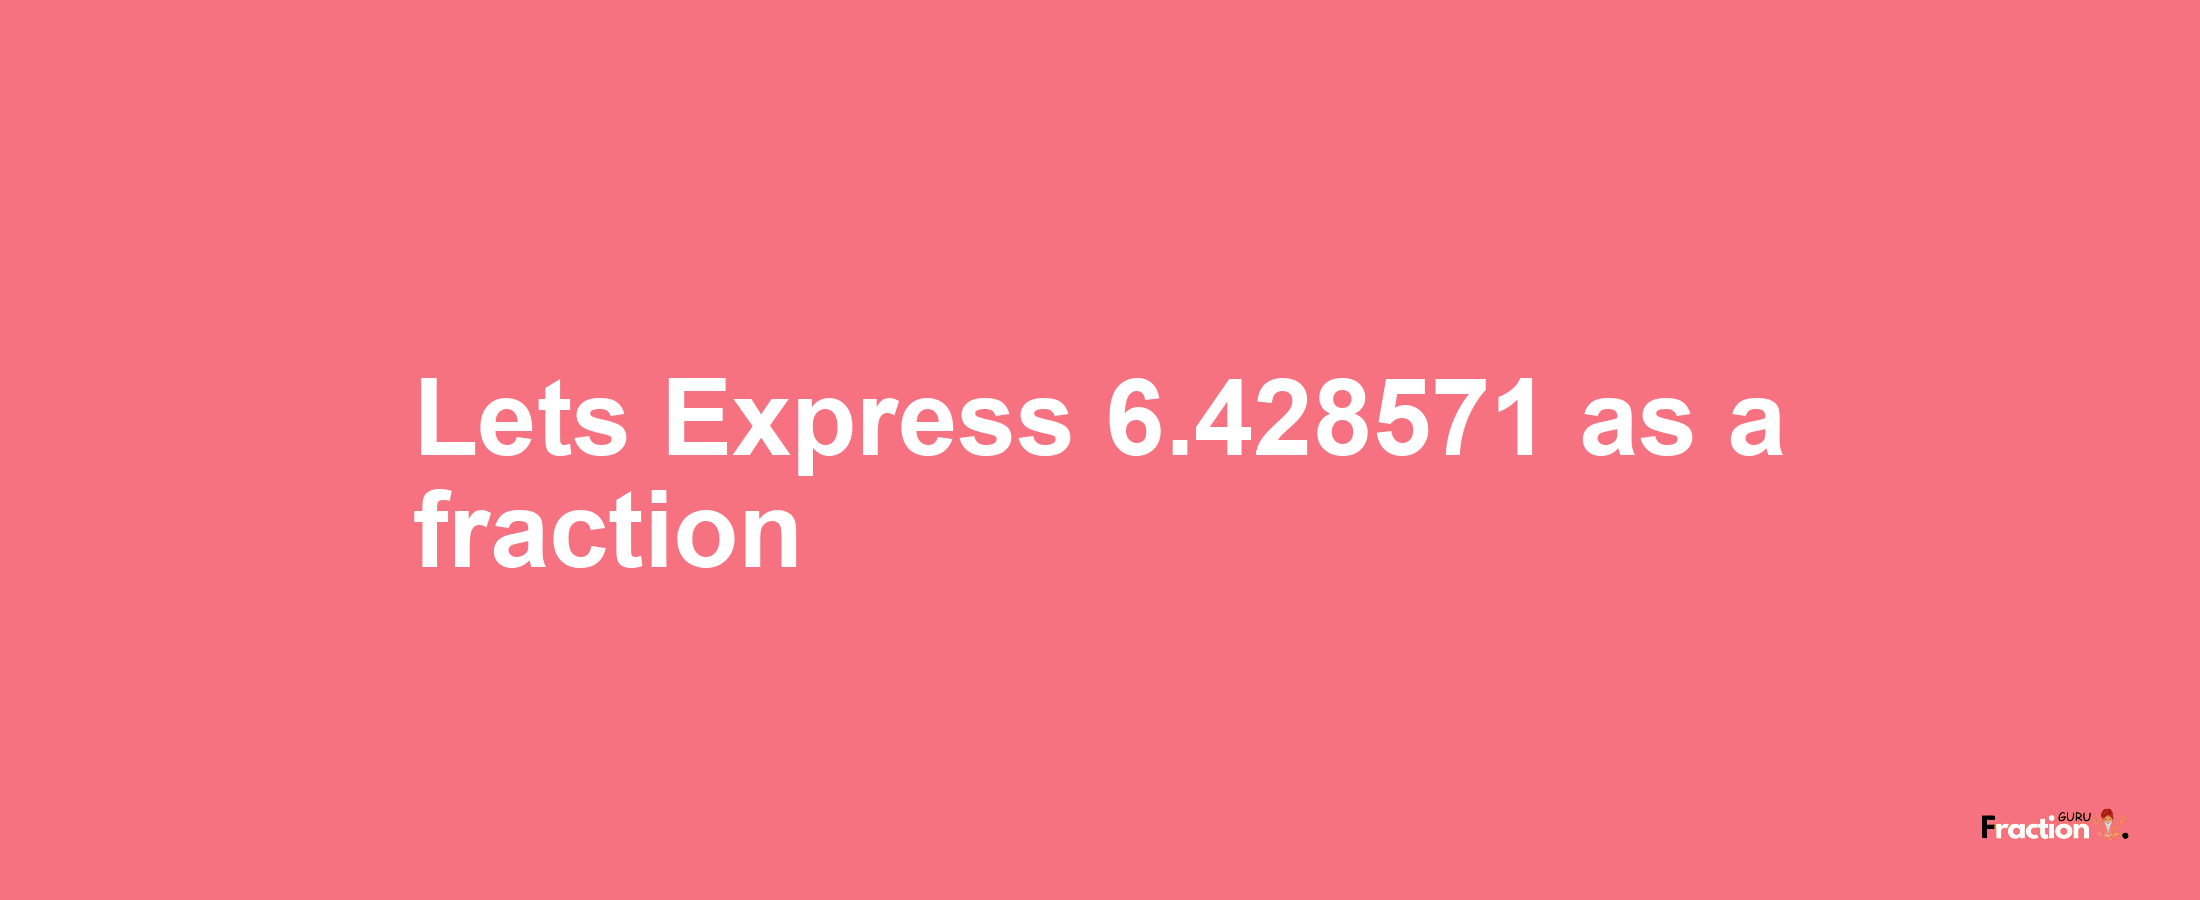 Lets Express 6.428571 as afraction